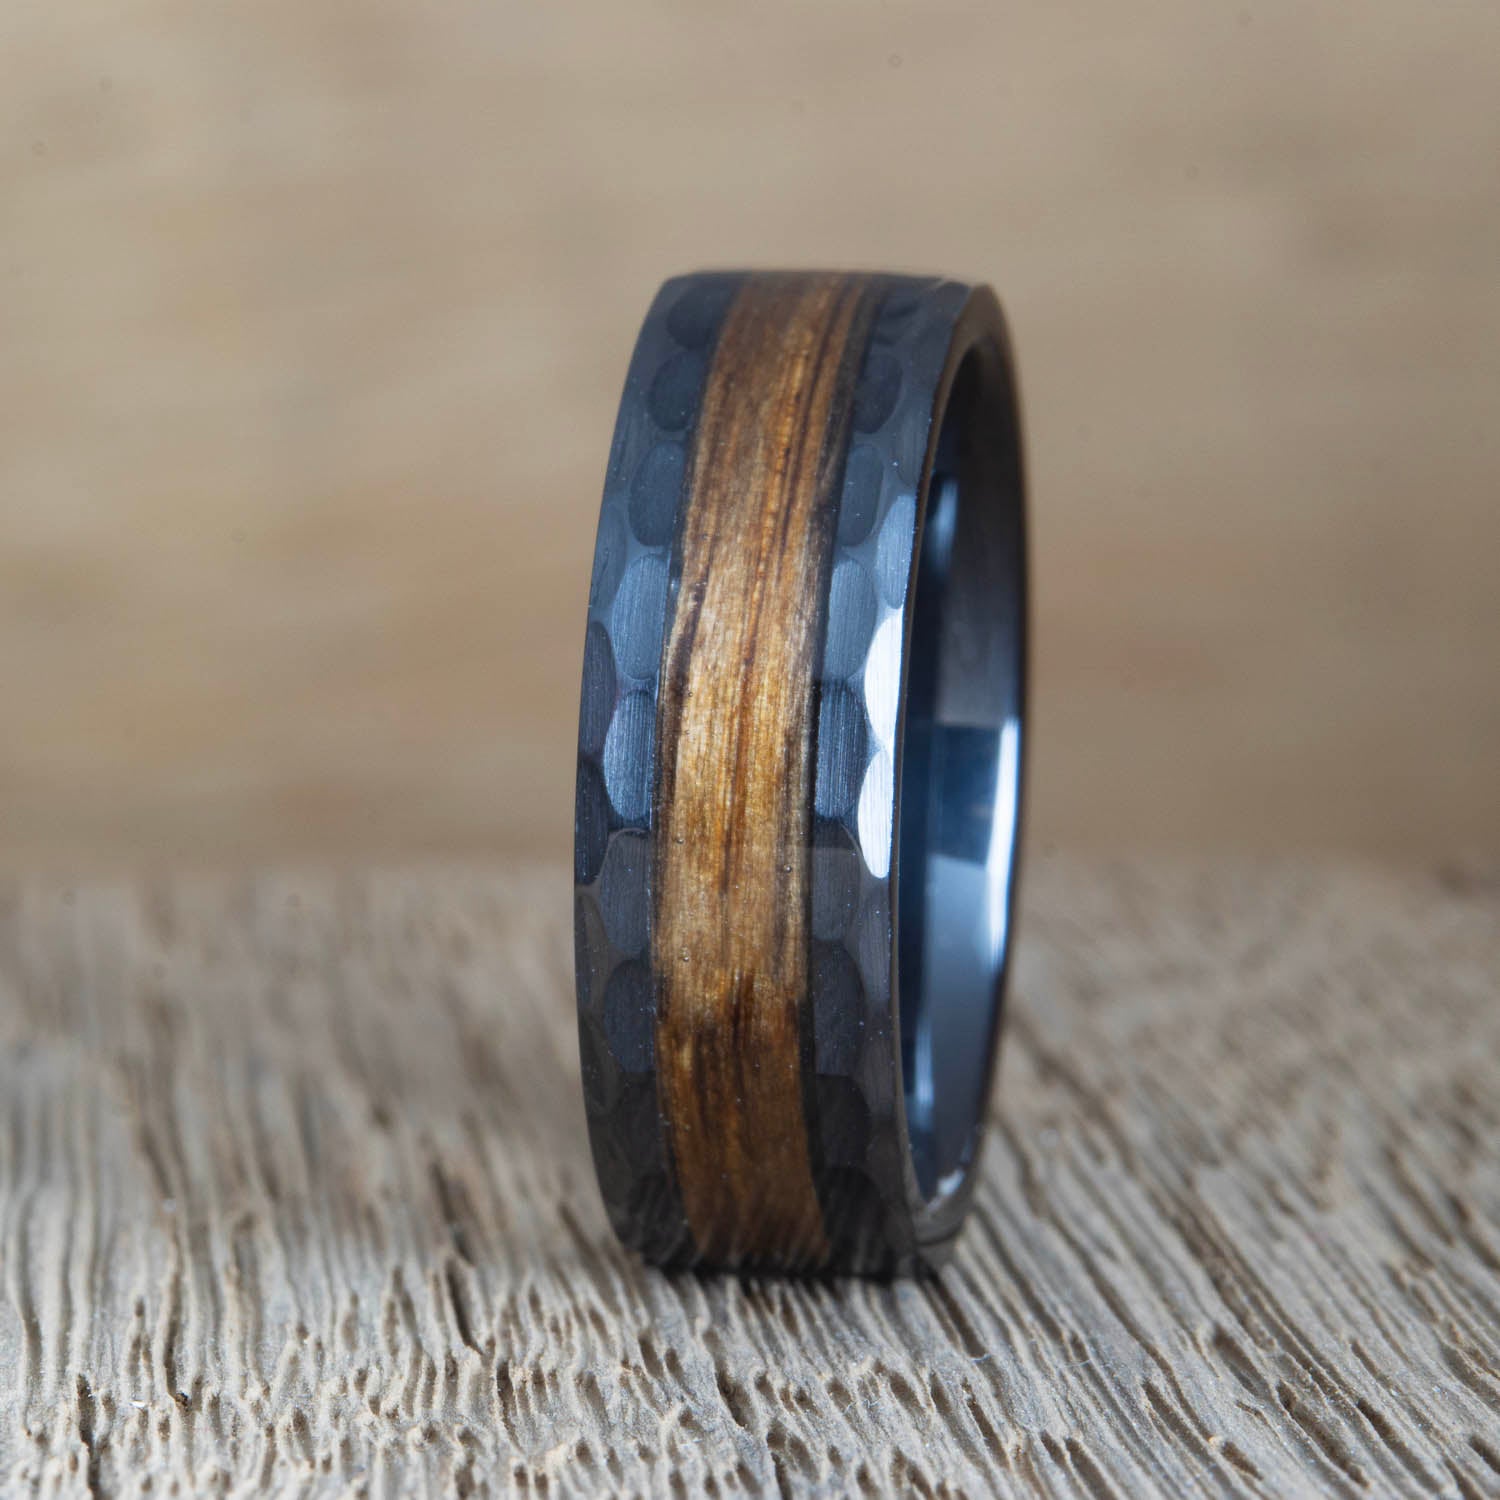 the whiskey hammered- black wedding band with whiskey barrel wood inlay